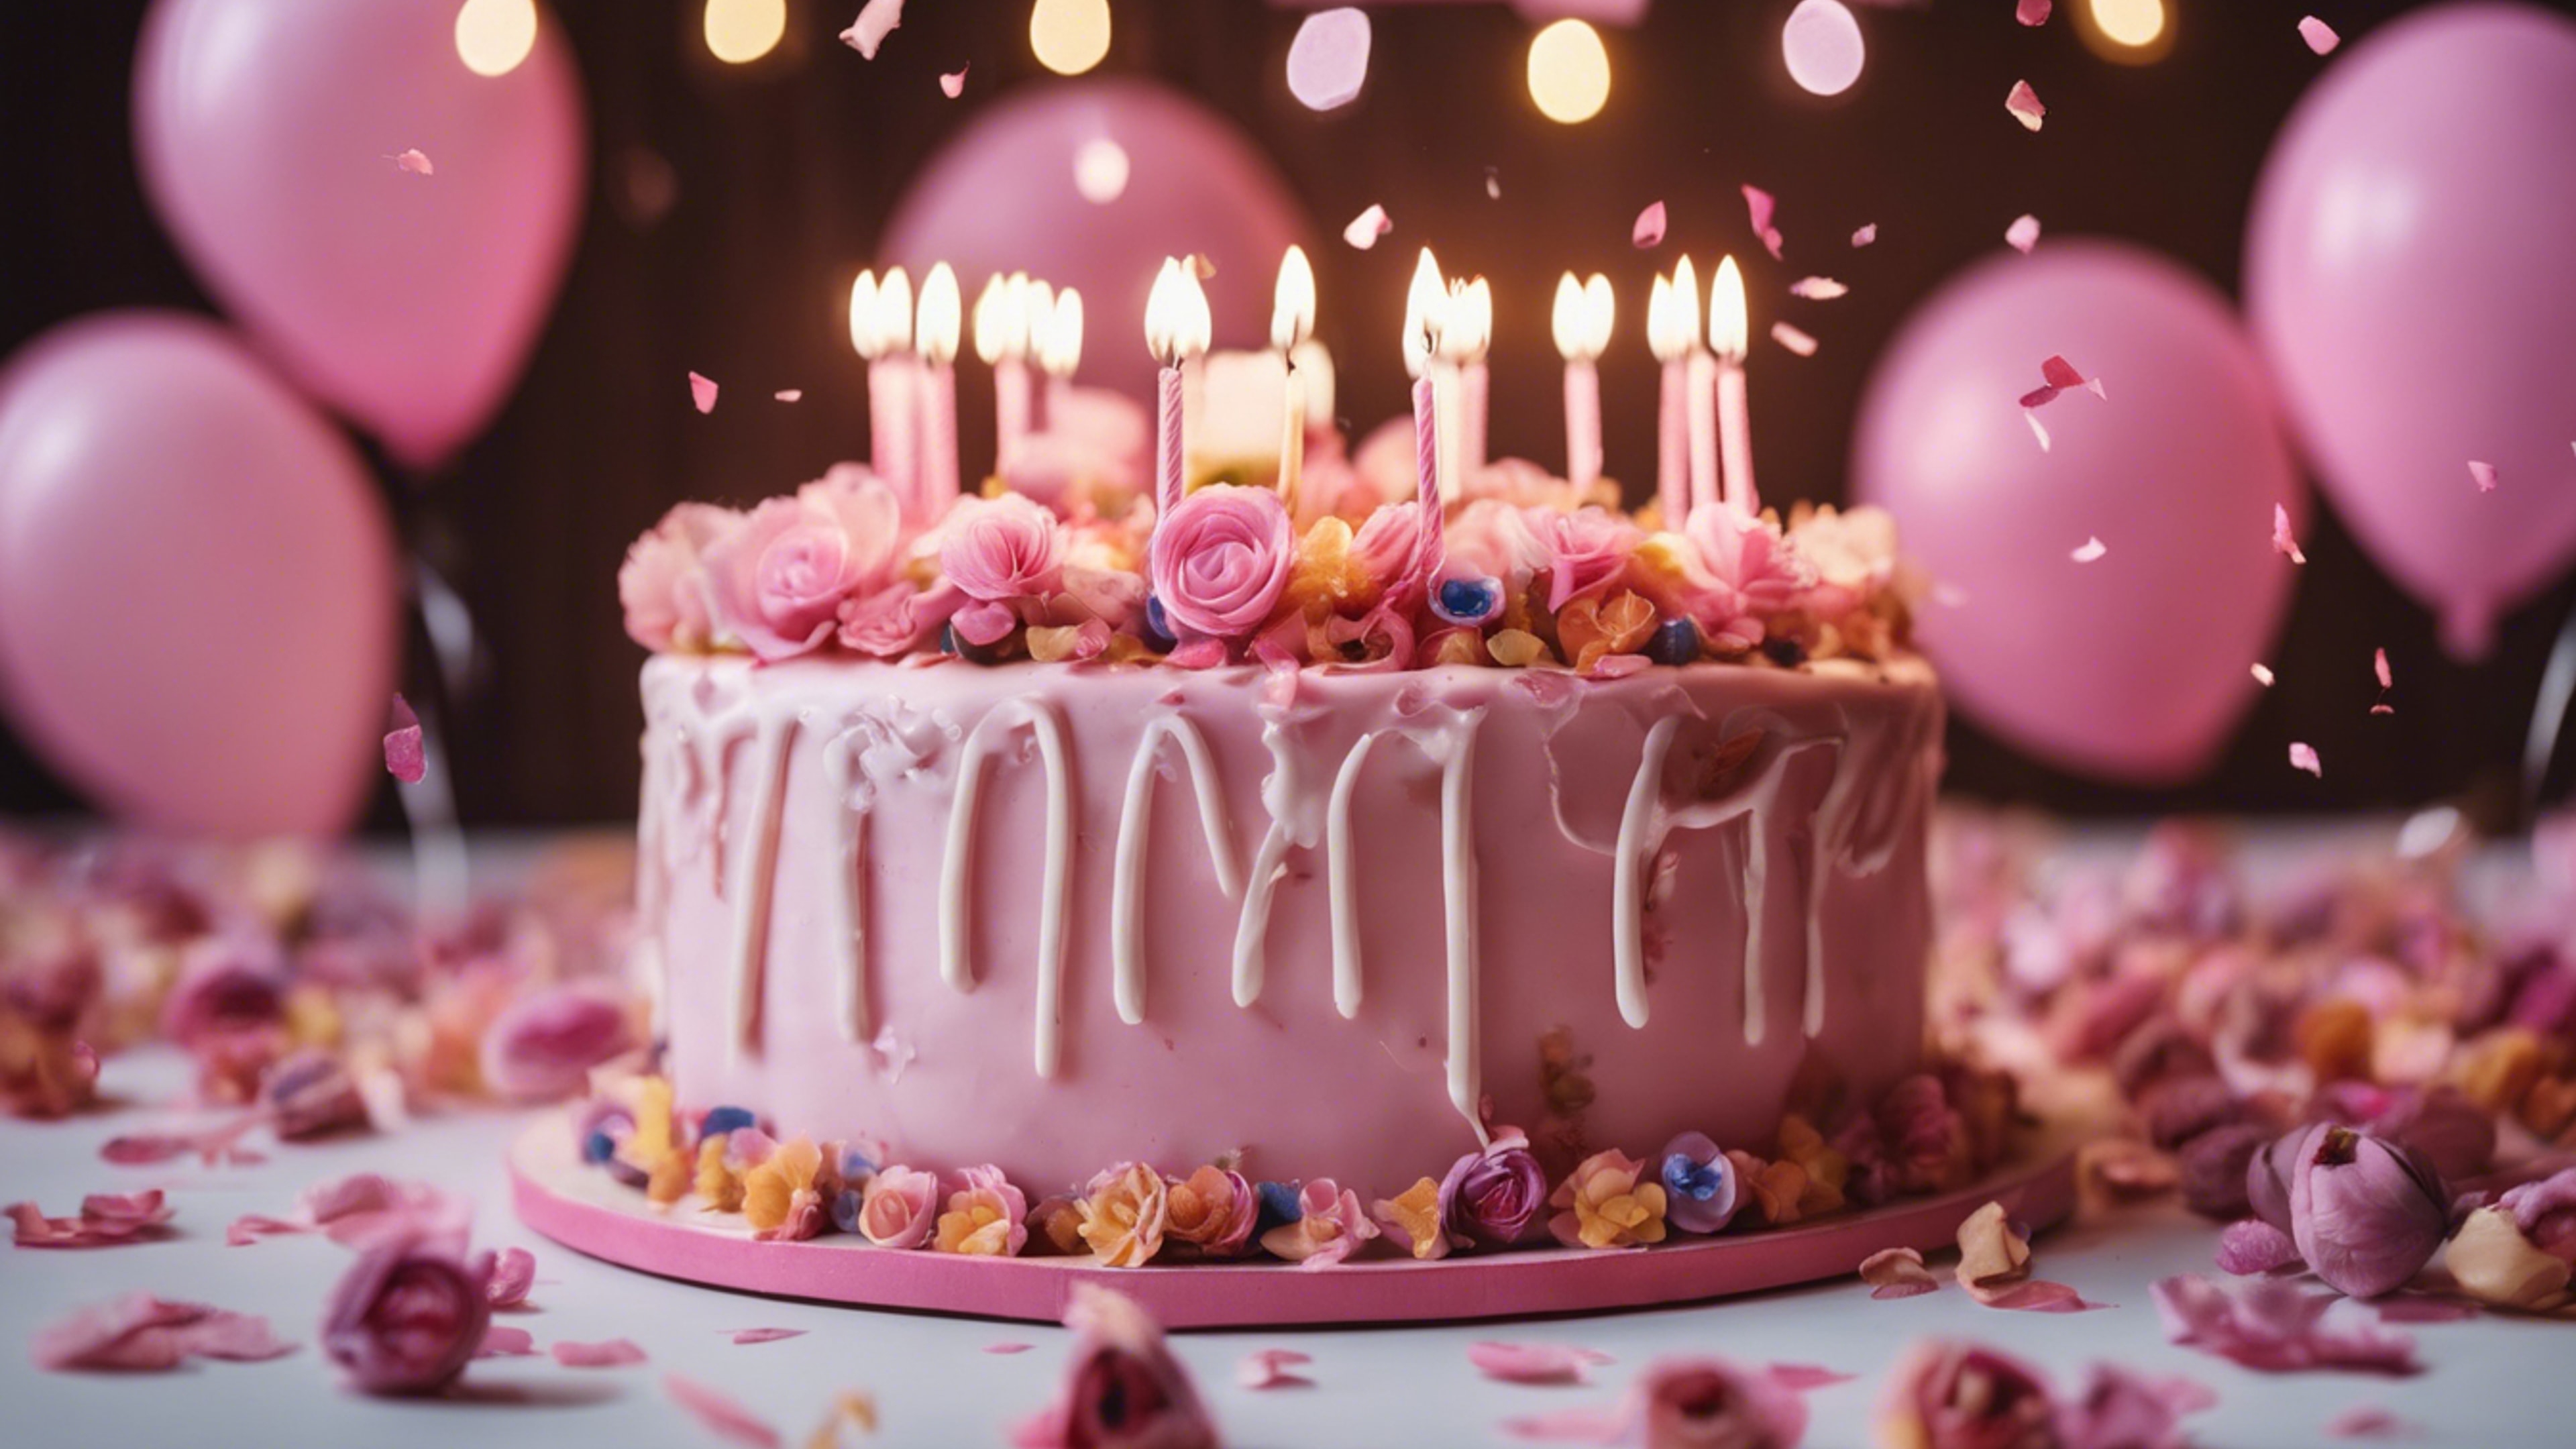 A girly birthday party with pink balloons, confetti, and a big cake decorated with edible flowers. Тапет[43e1da28e36740768483]